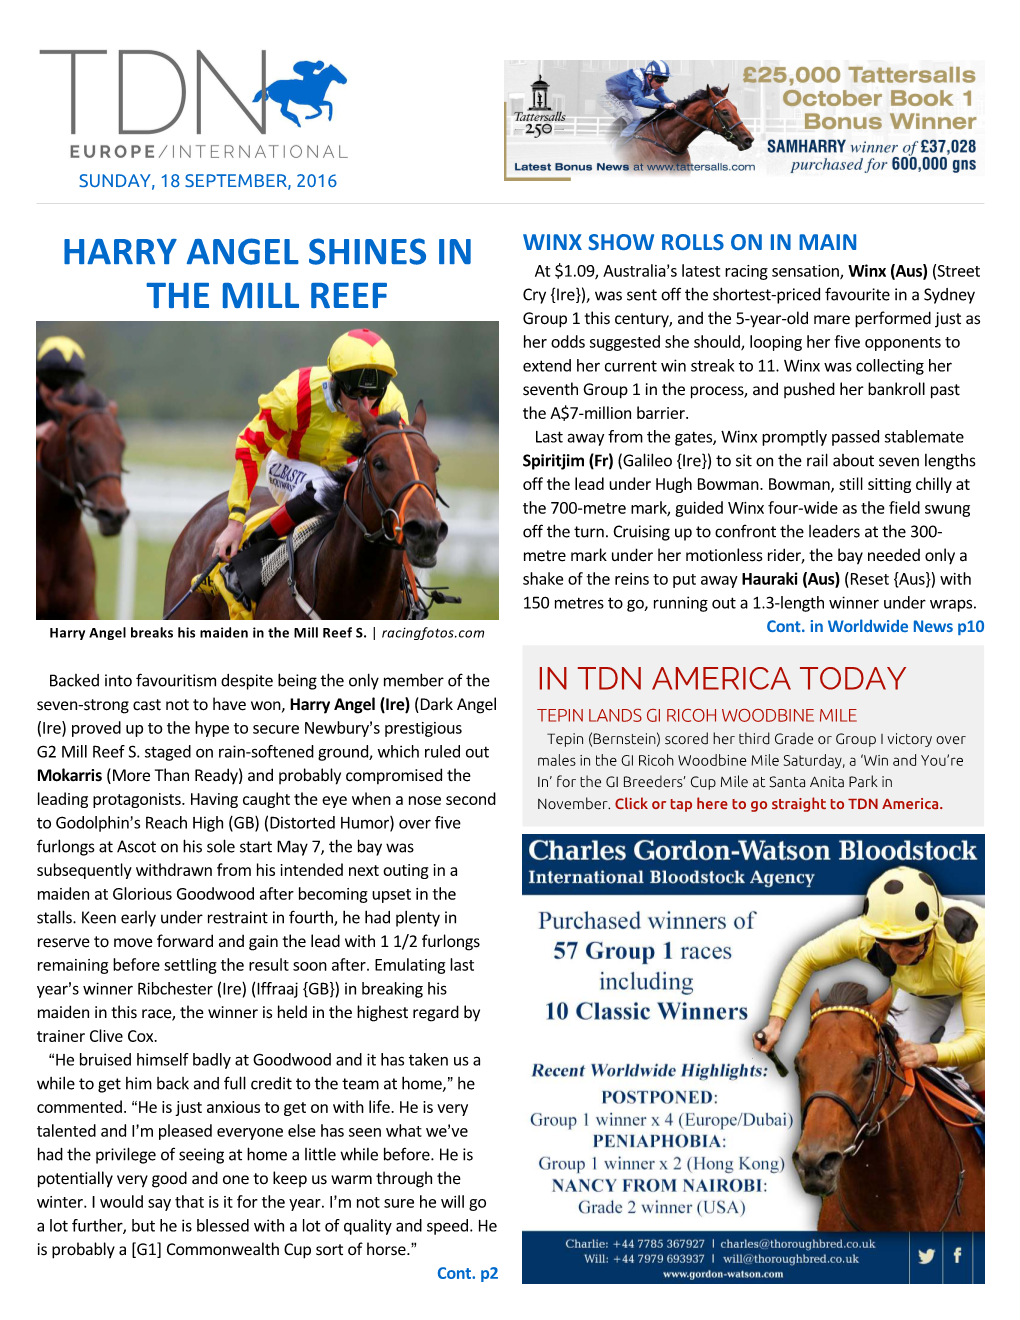 Harry Angel Shines in the Mill Reef